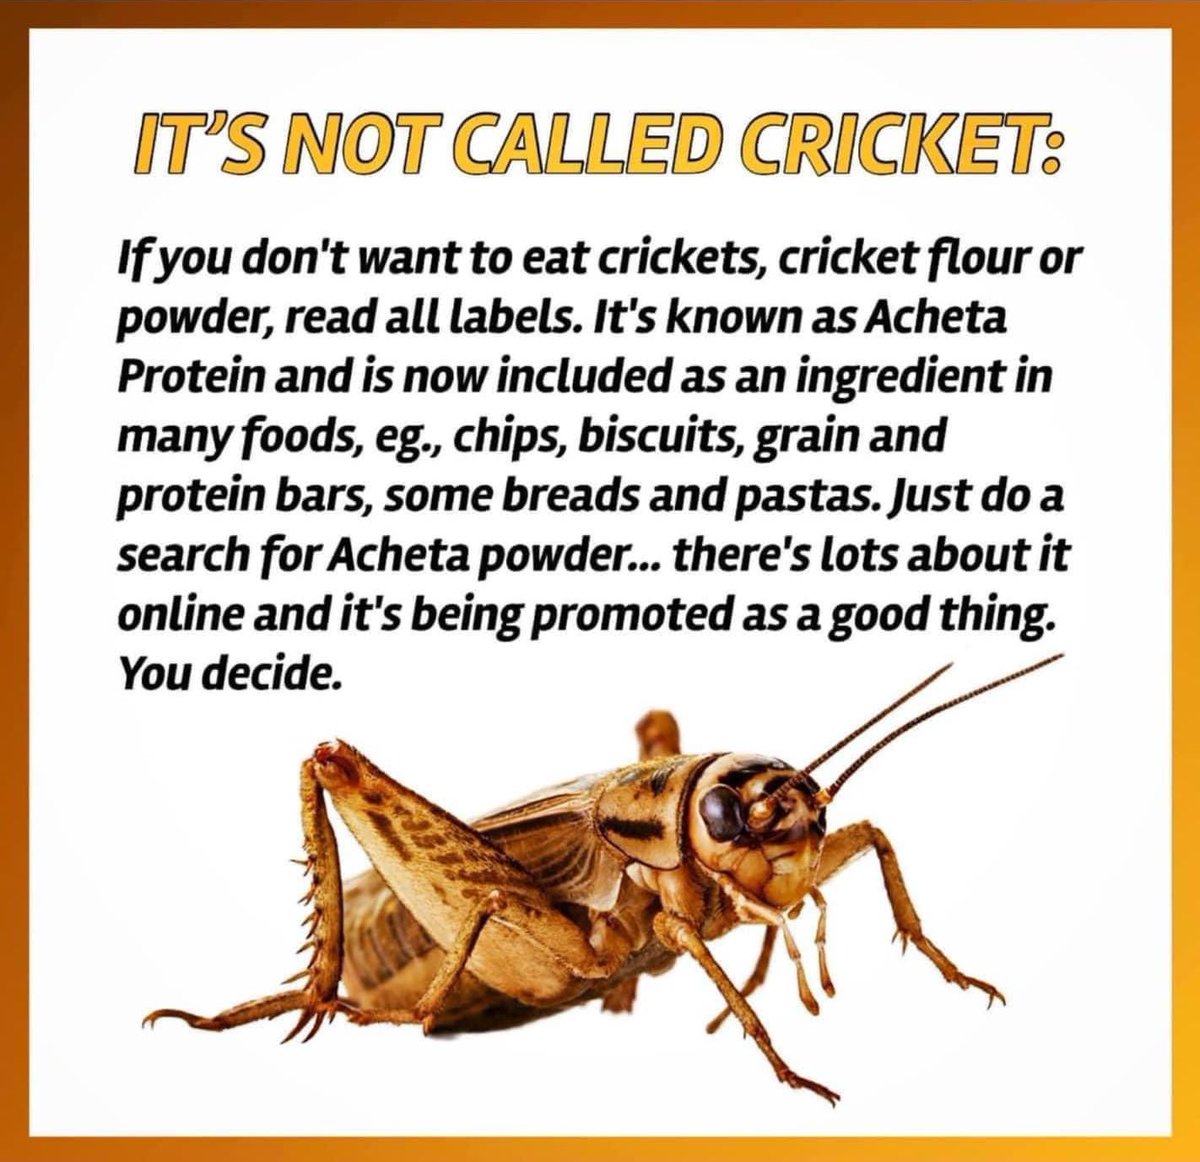 Omg!!! I really need to start reading labels!!! 🤦🏻‍♀️ Have you noticed Acheta Protein in any products? I’m sorry but I do not want to eat crickets!! 🤮🤮🤮